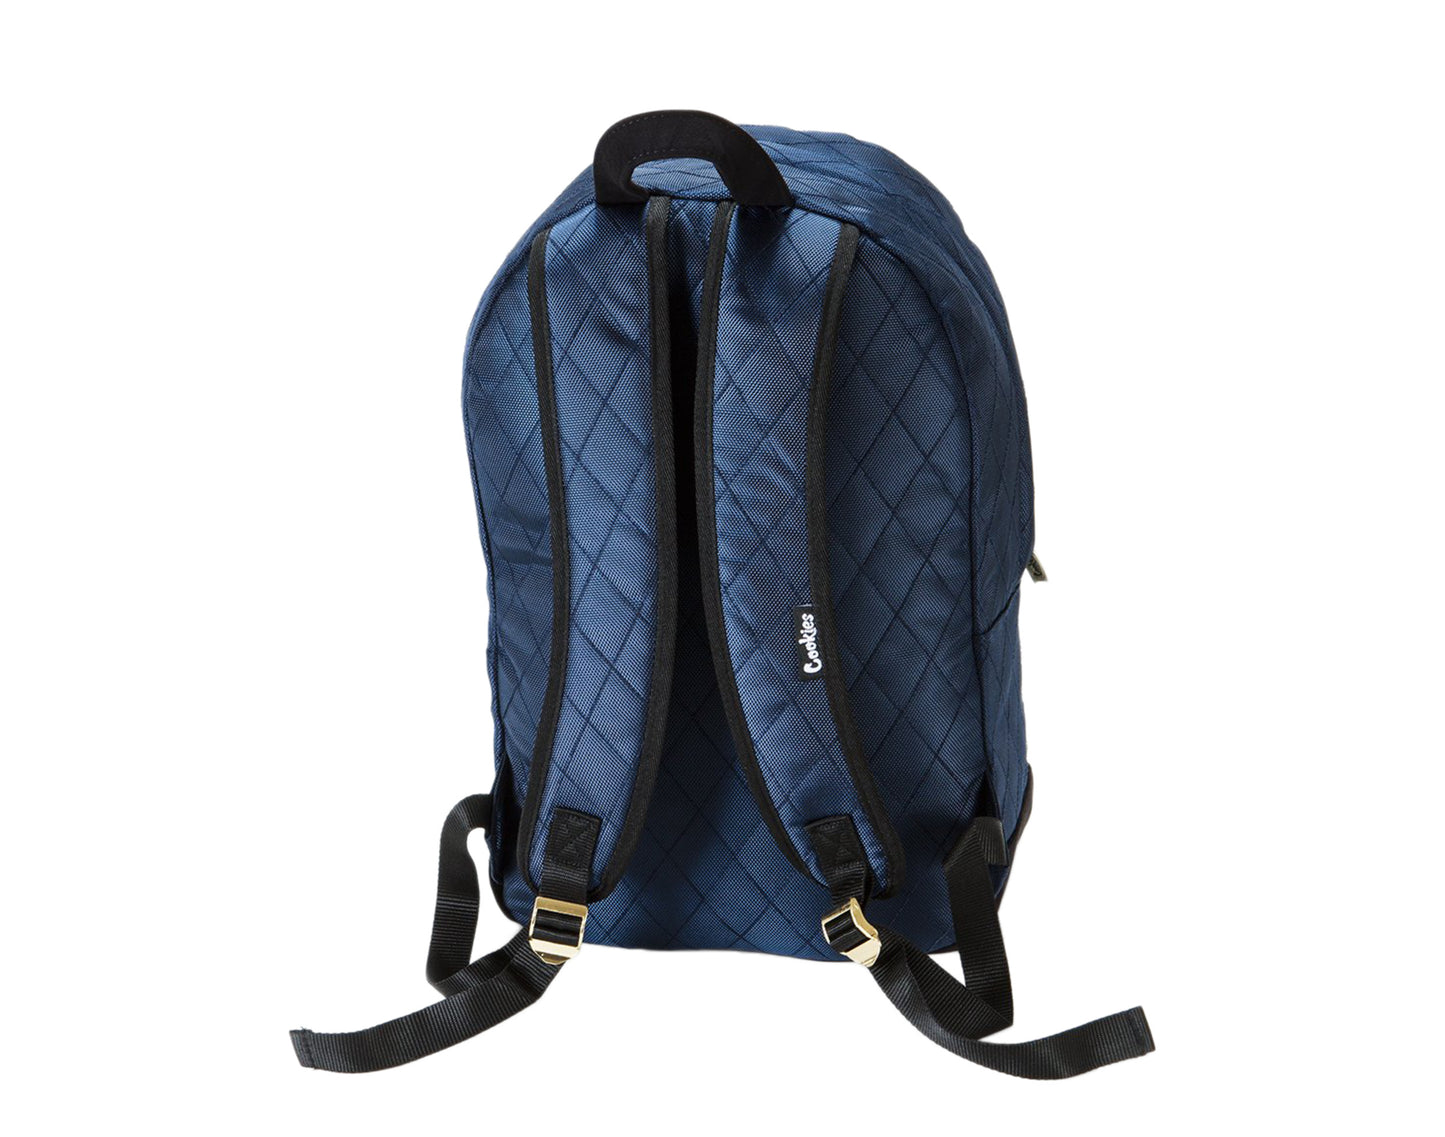 Cookies V3 Quilted Nylon Smell Proof Navy Backpack 1546A4394-NAV